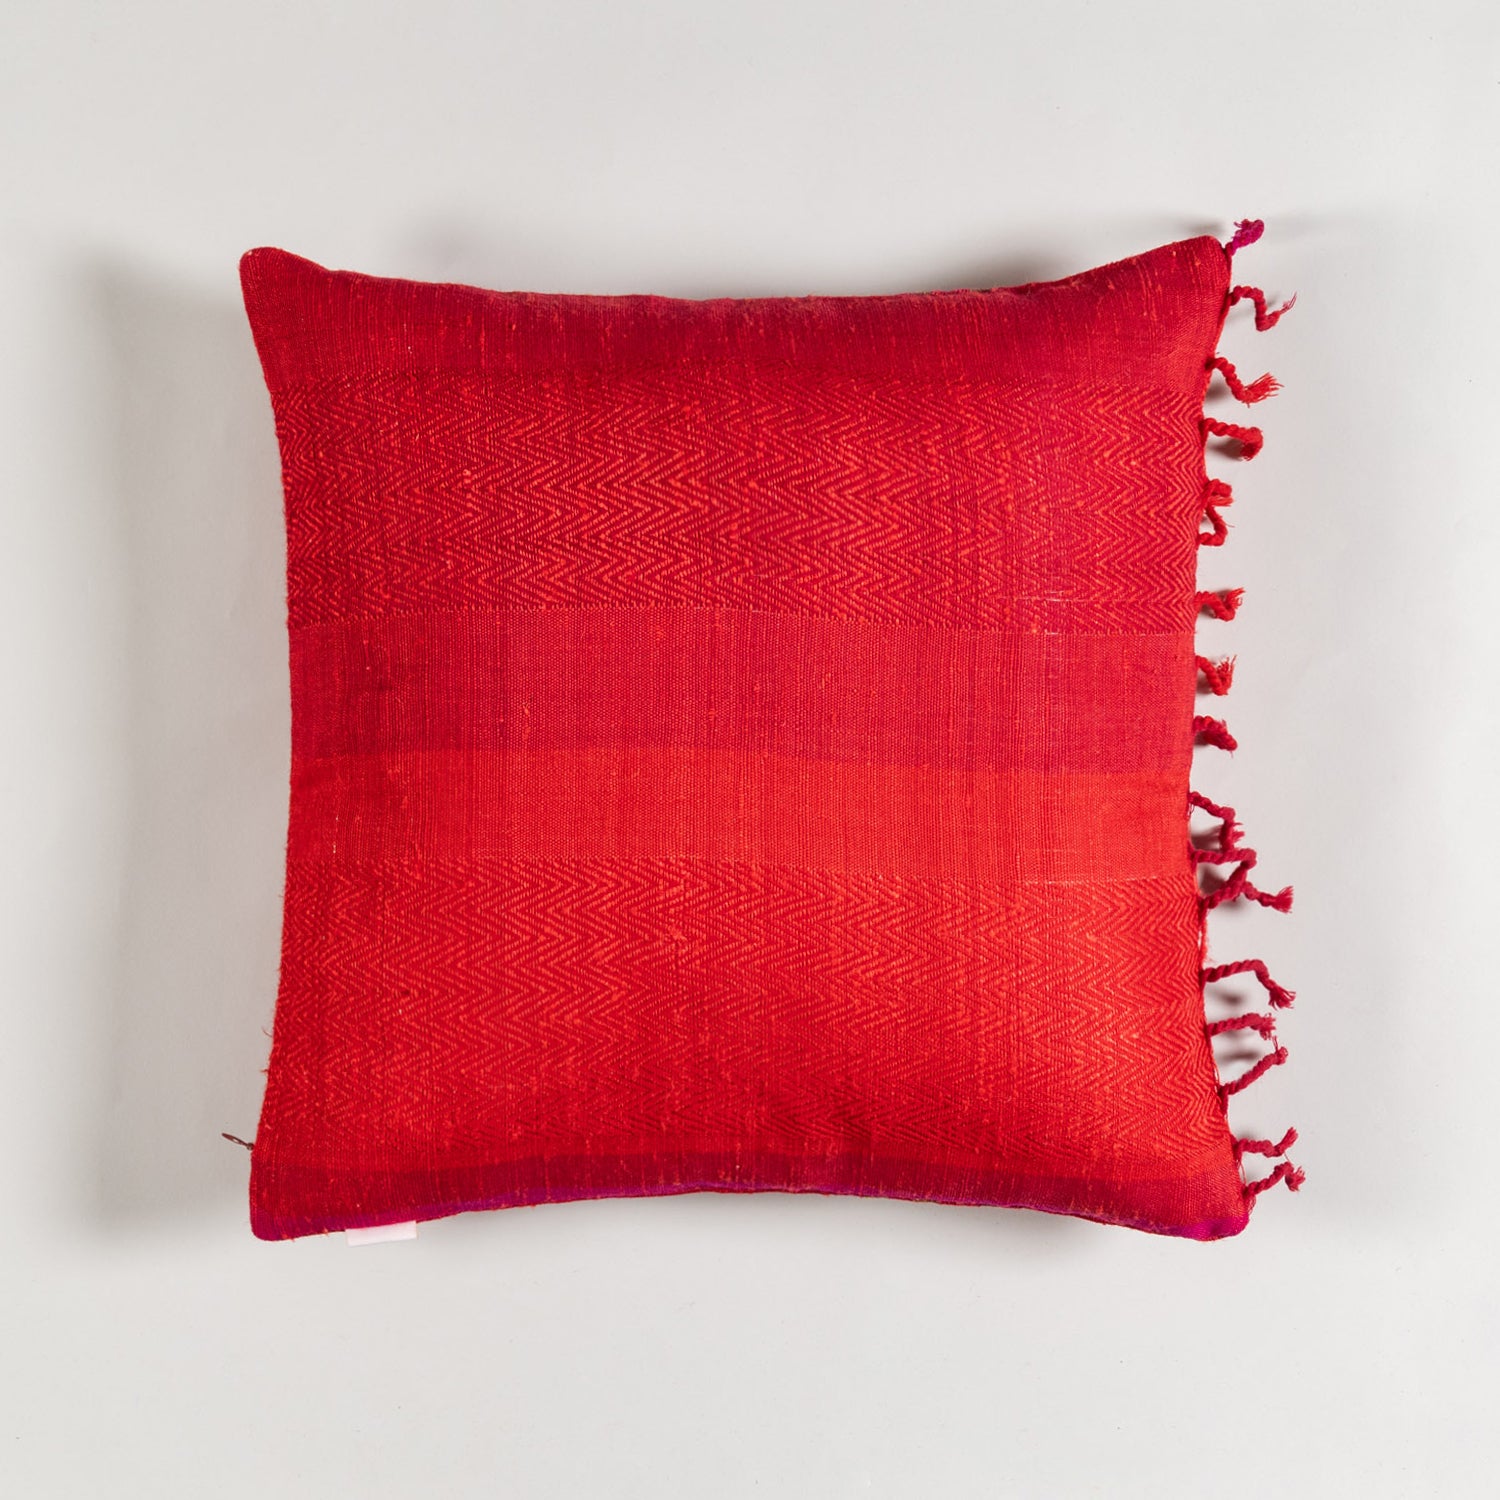 Handwoven Upcycled Red Wool & Oak Silk Cushion Cover - 18x18